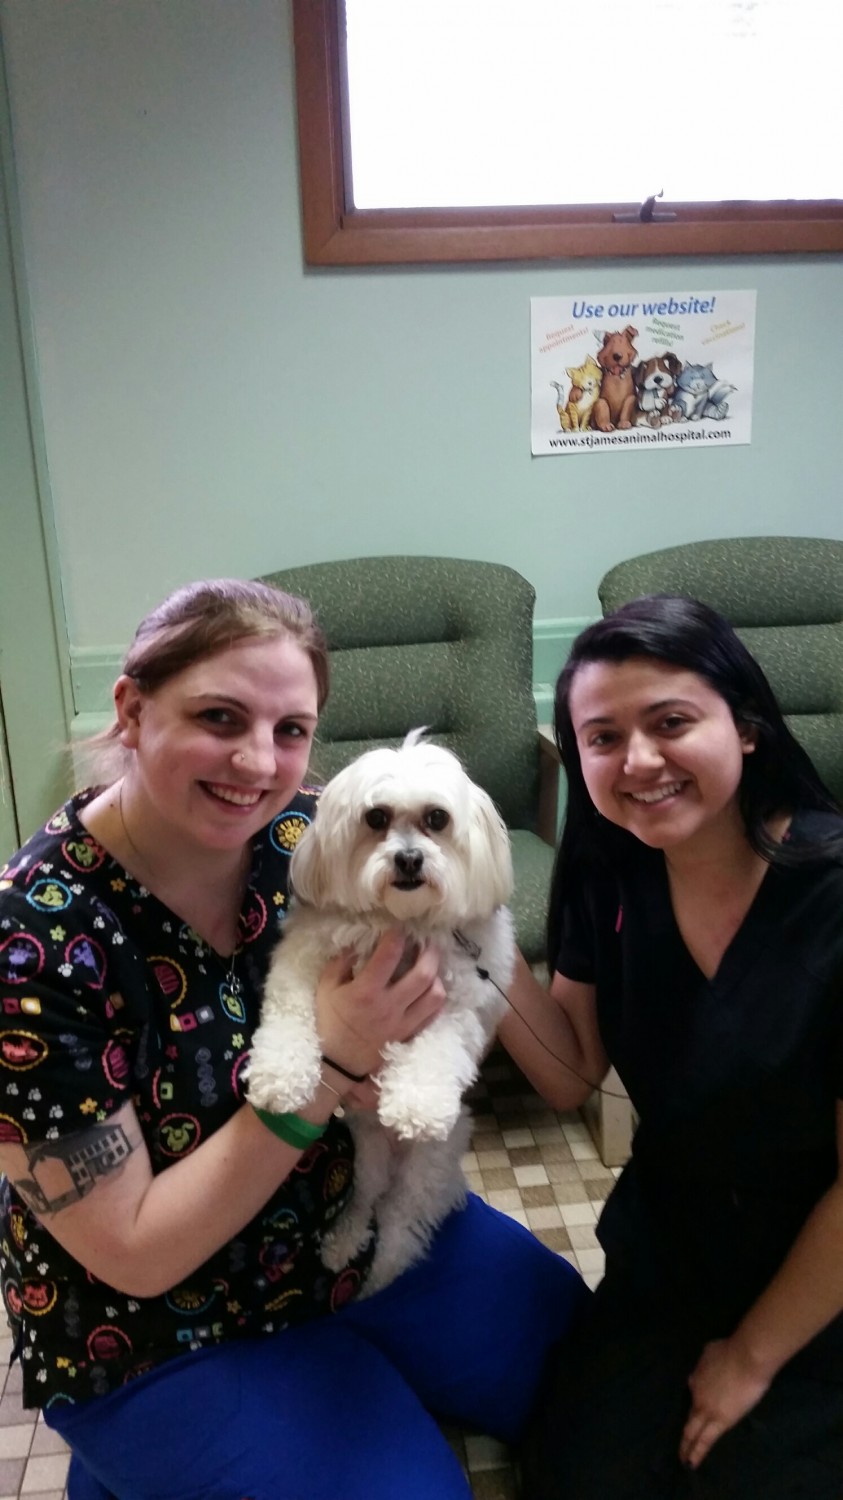 Brittany & Veronica posing with cuddly patient